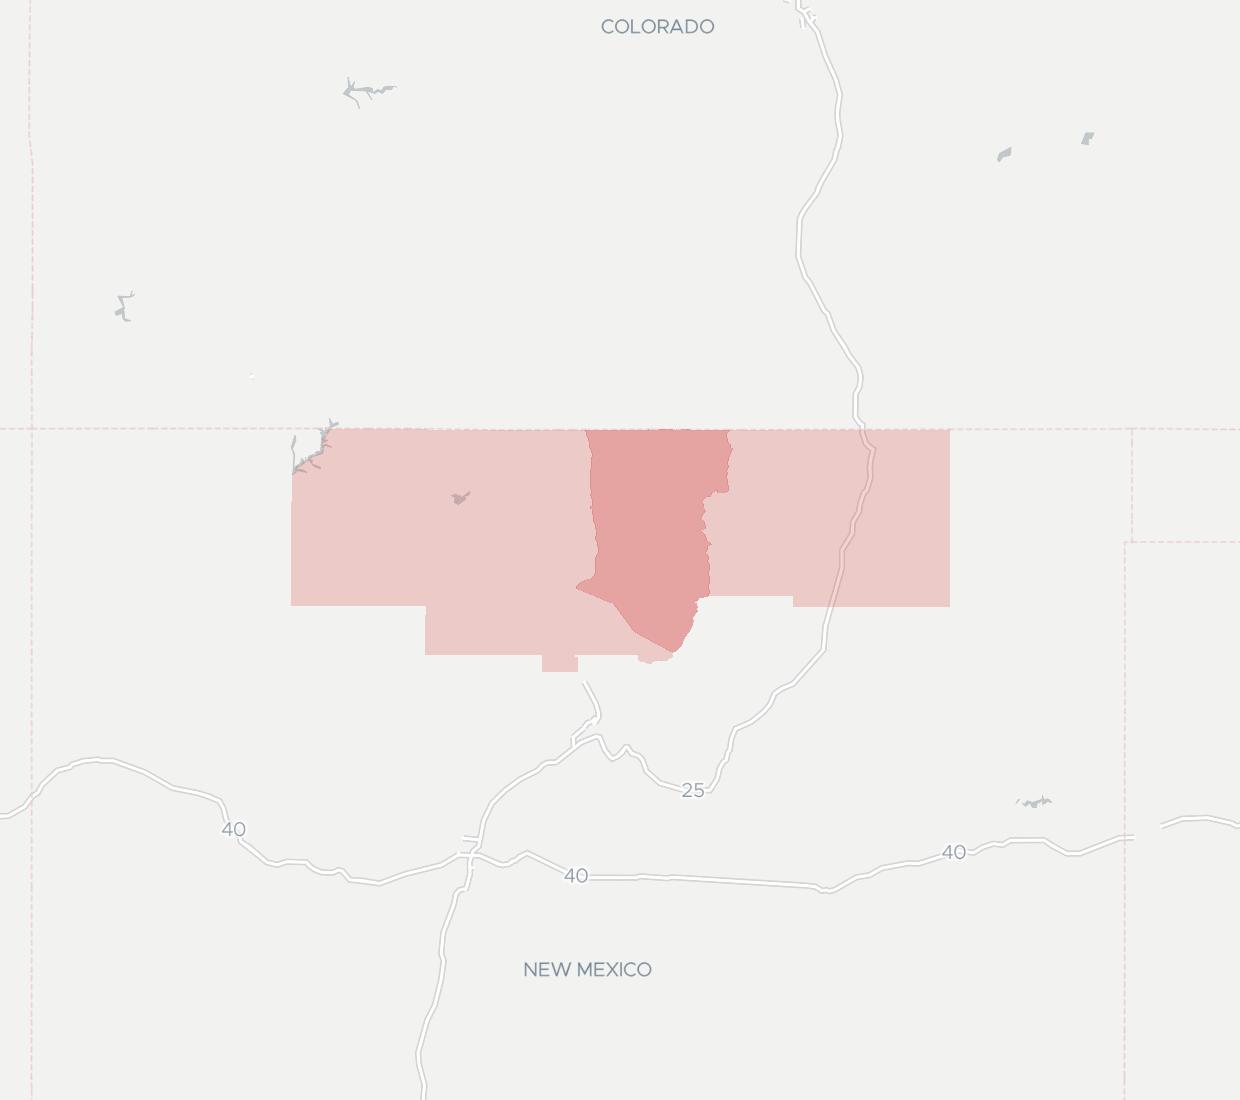 Kit Carson Internet Availability Map. Click for interactive map